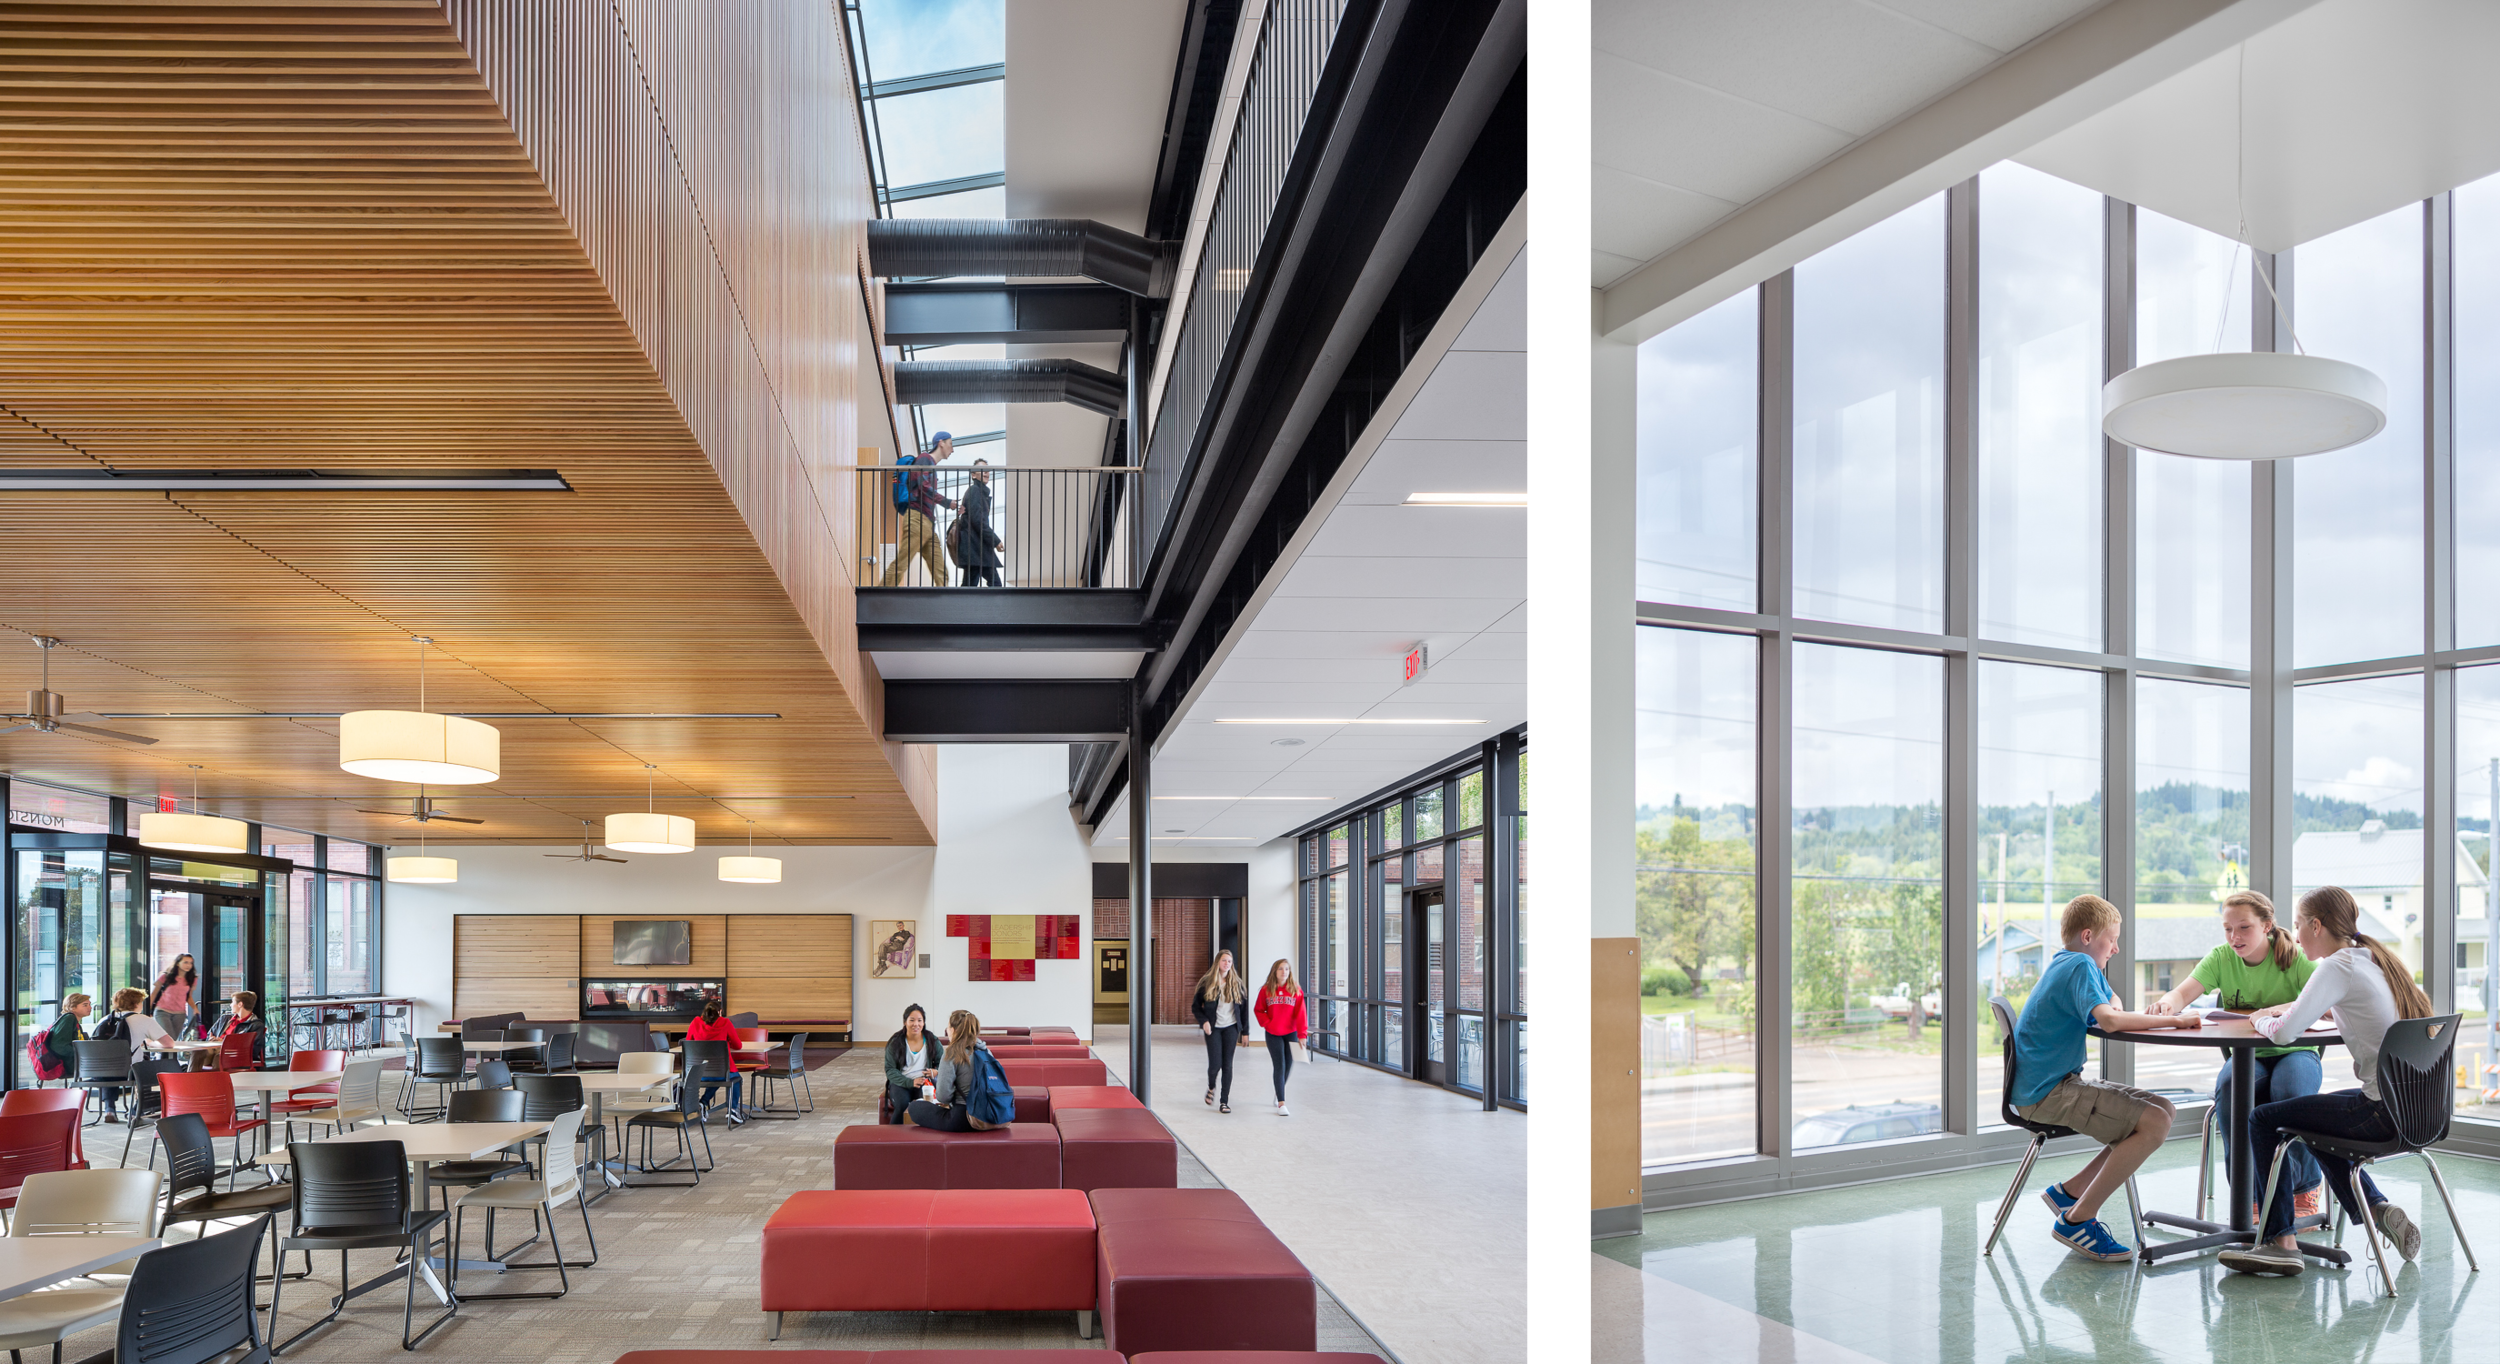  Left: Central Catholic High School / Bora Architects Right: Banks Middle School / DLR Group 